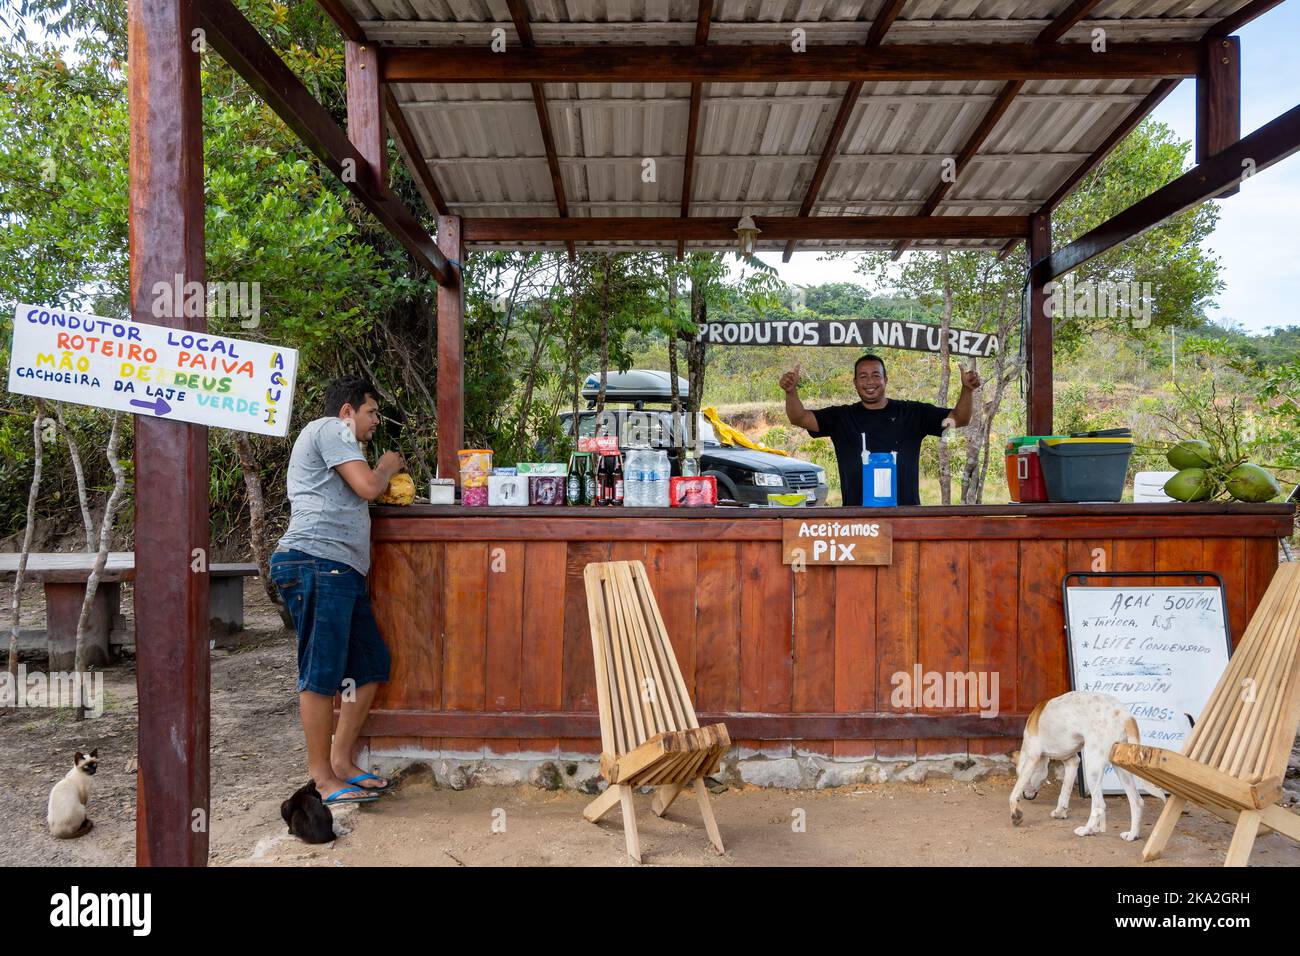 A man selling snacks and cold drinks at a roadside stand. Tepequém, Roraima State, Brazil. Stock Photo